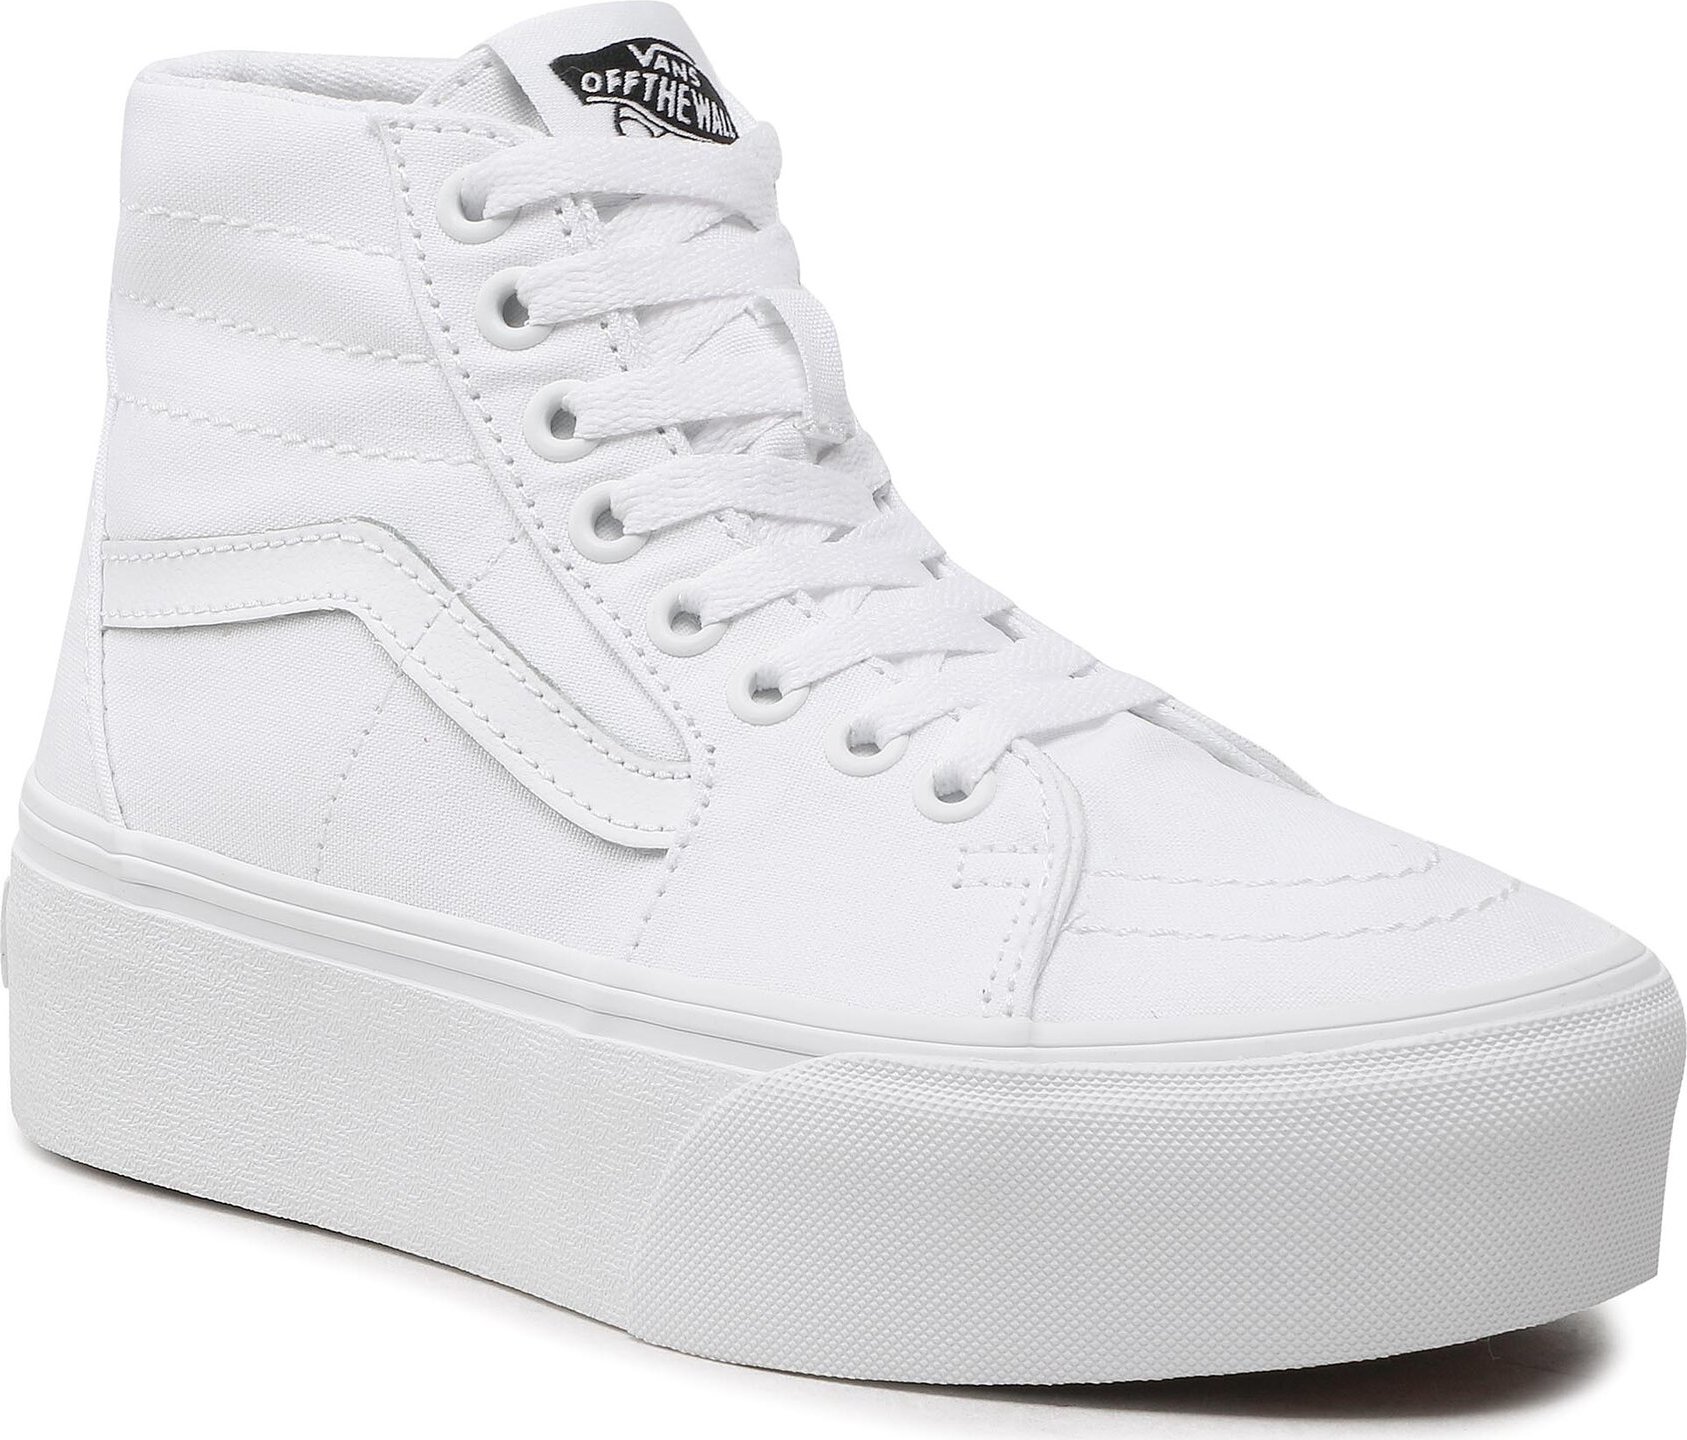 Sneakersy Vans Sk8-Hi Tapered VN0A5JMKW001 Canvas True White